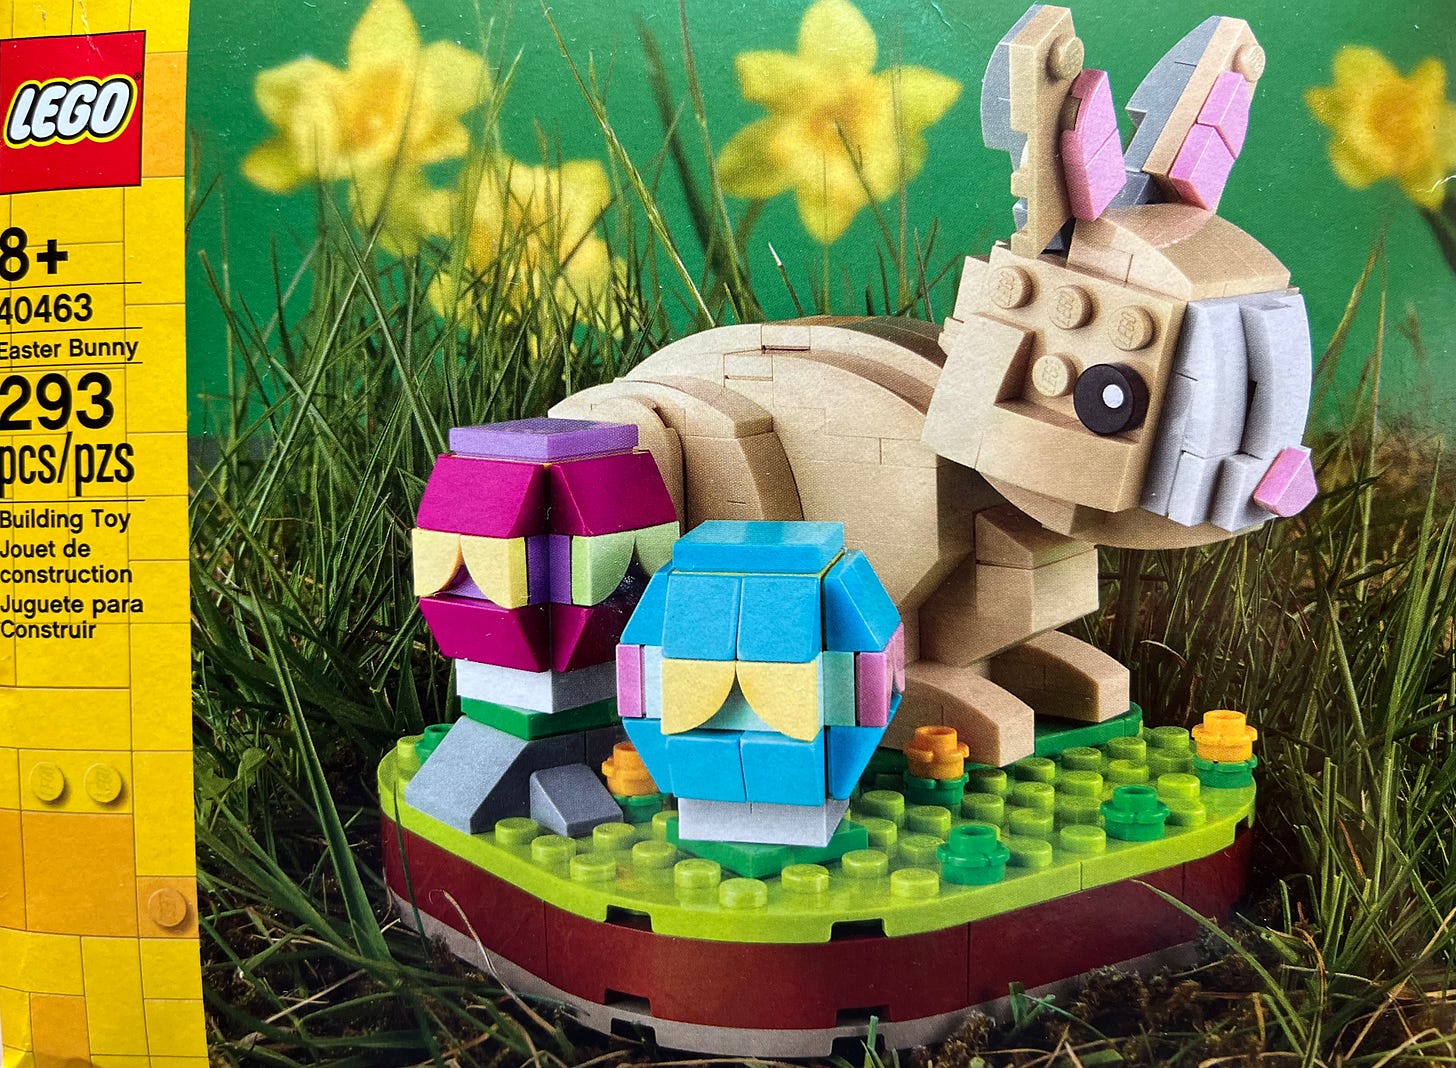 Photo of LEGO 40463 Easter Bunny box. A small build with a cute brown bunny next to 2 easter eggs and flowers on a green base.